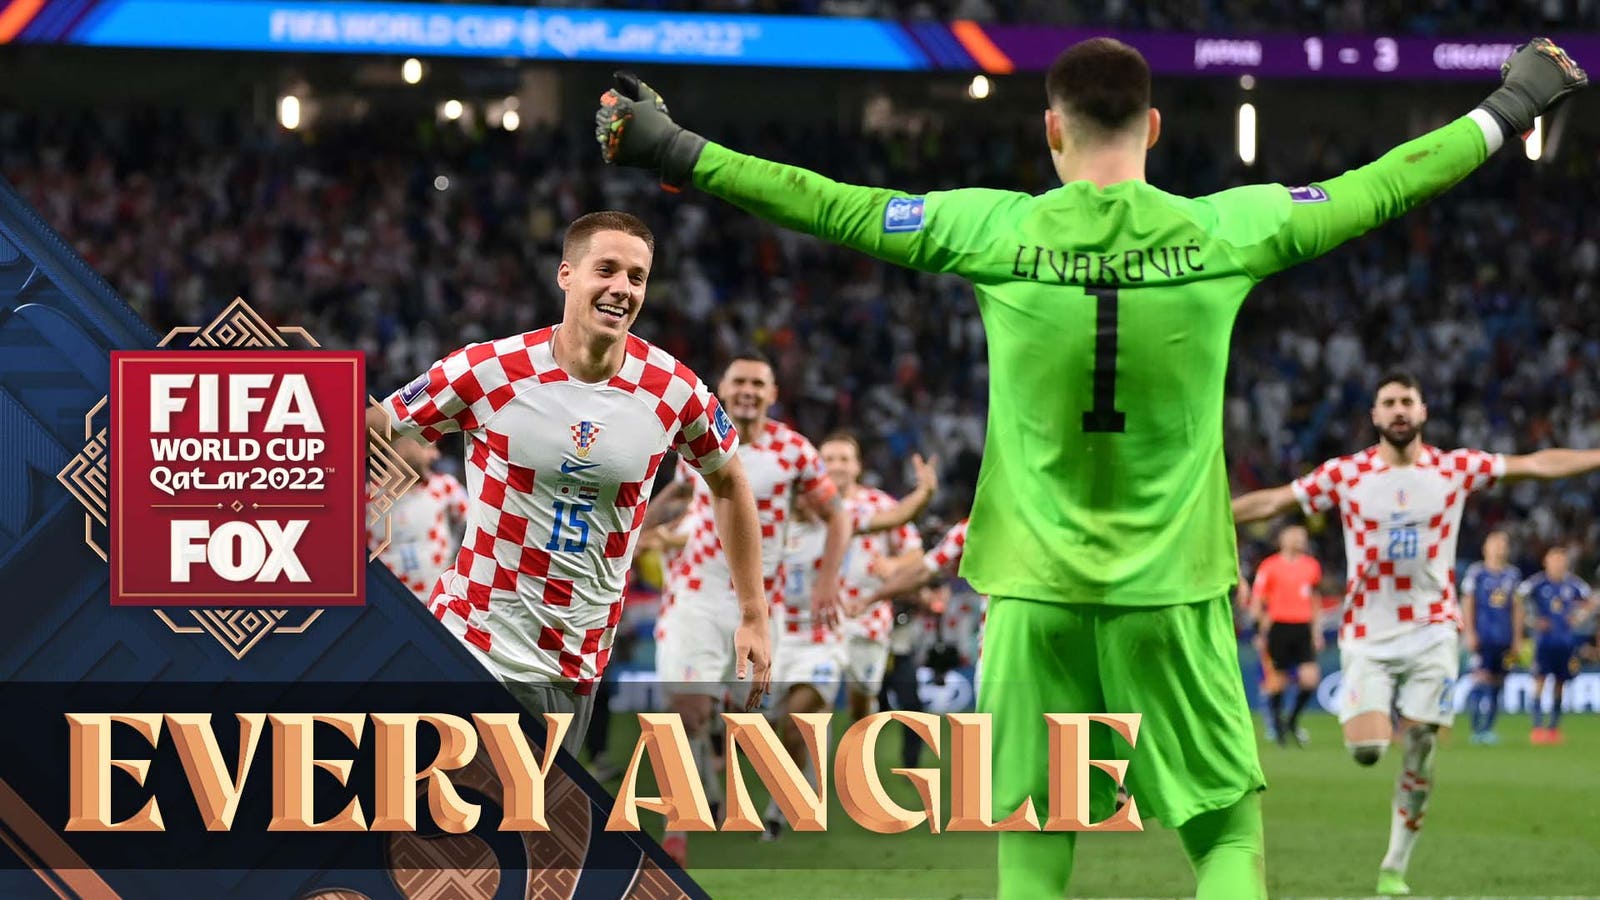 Croatia's Dominik Livakovic HOLDS THE FORT DOWN against Brazil in the 2022 FIFA World Cup | FOX Soccer